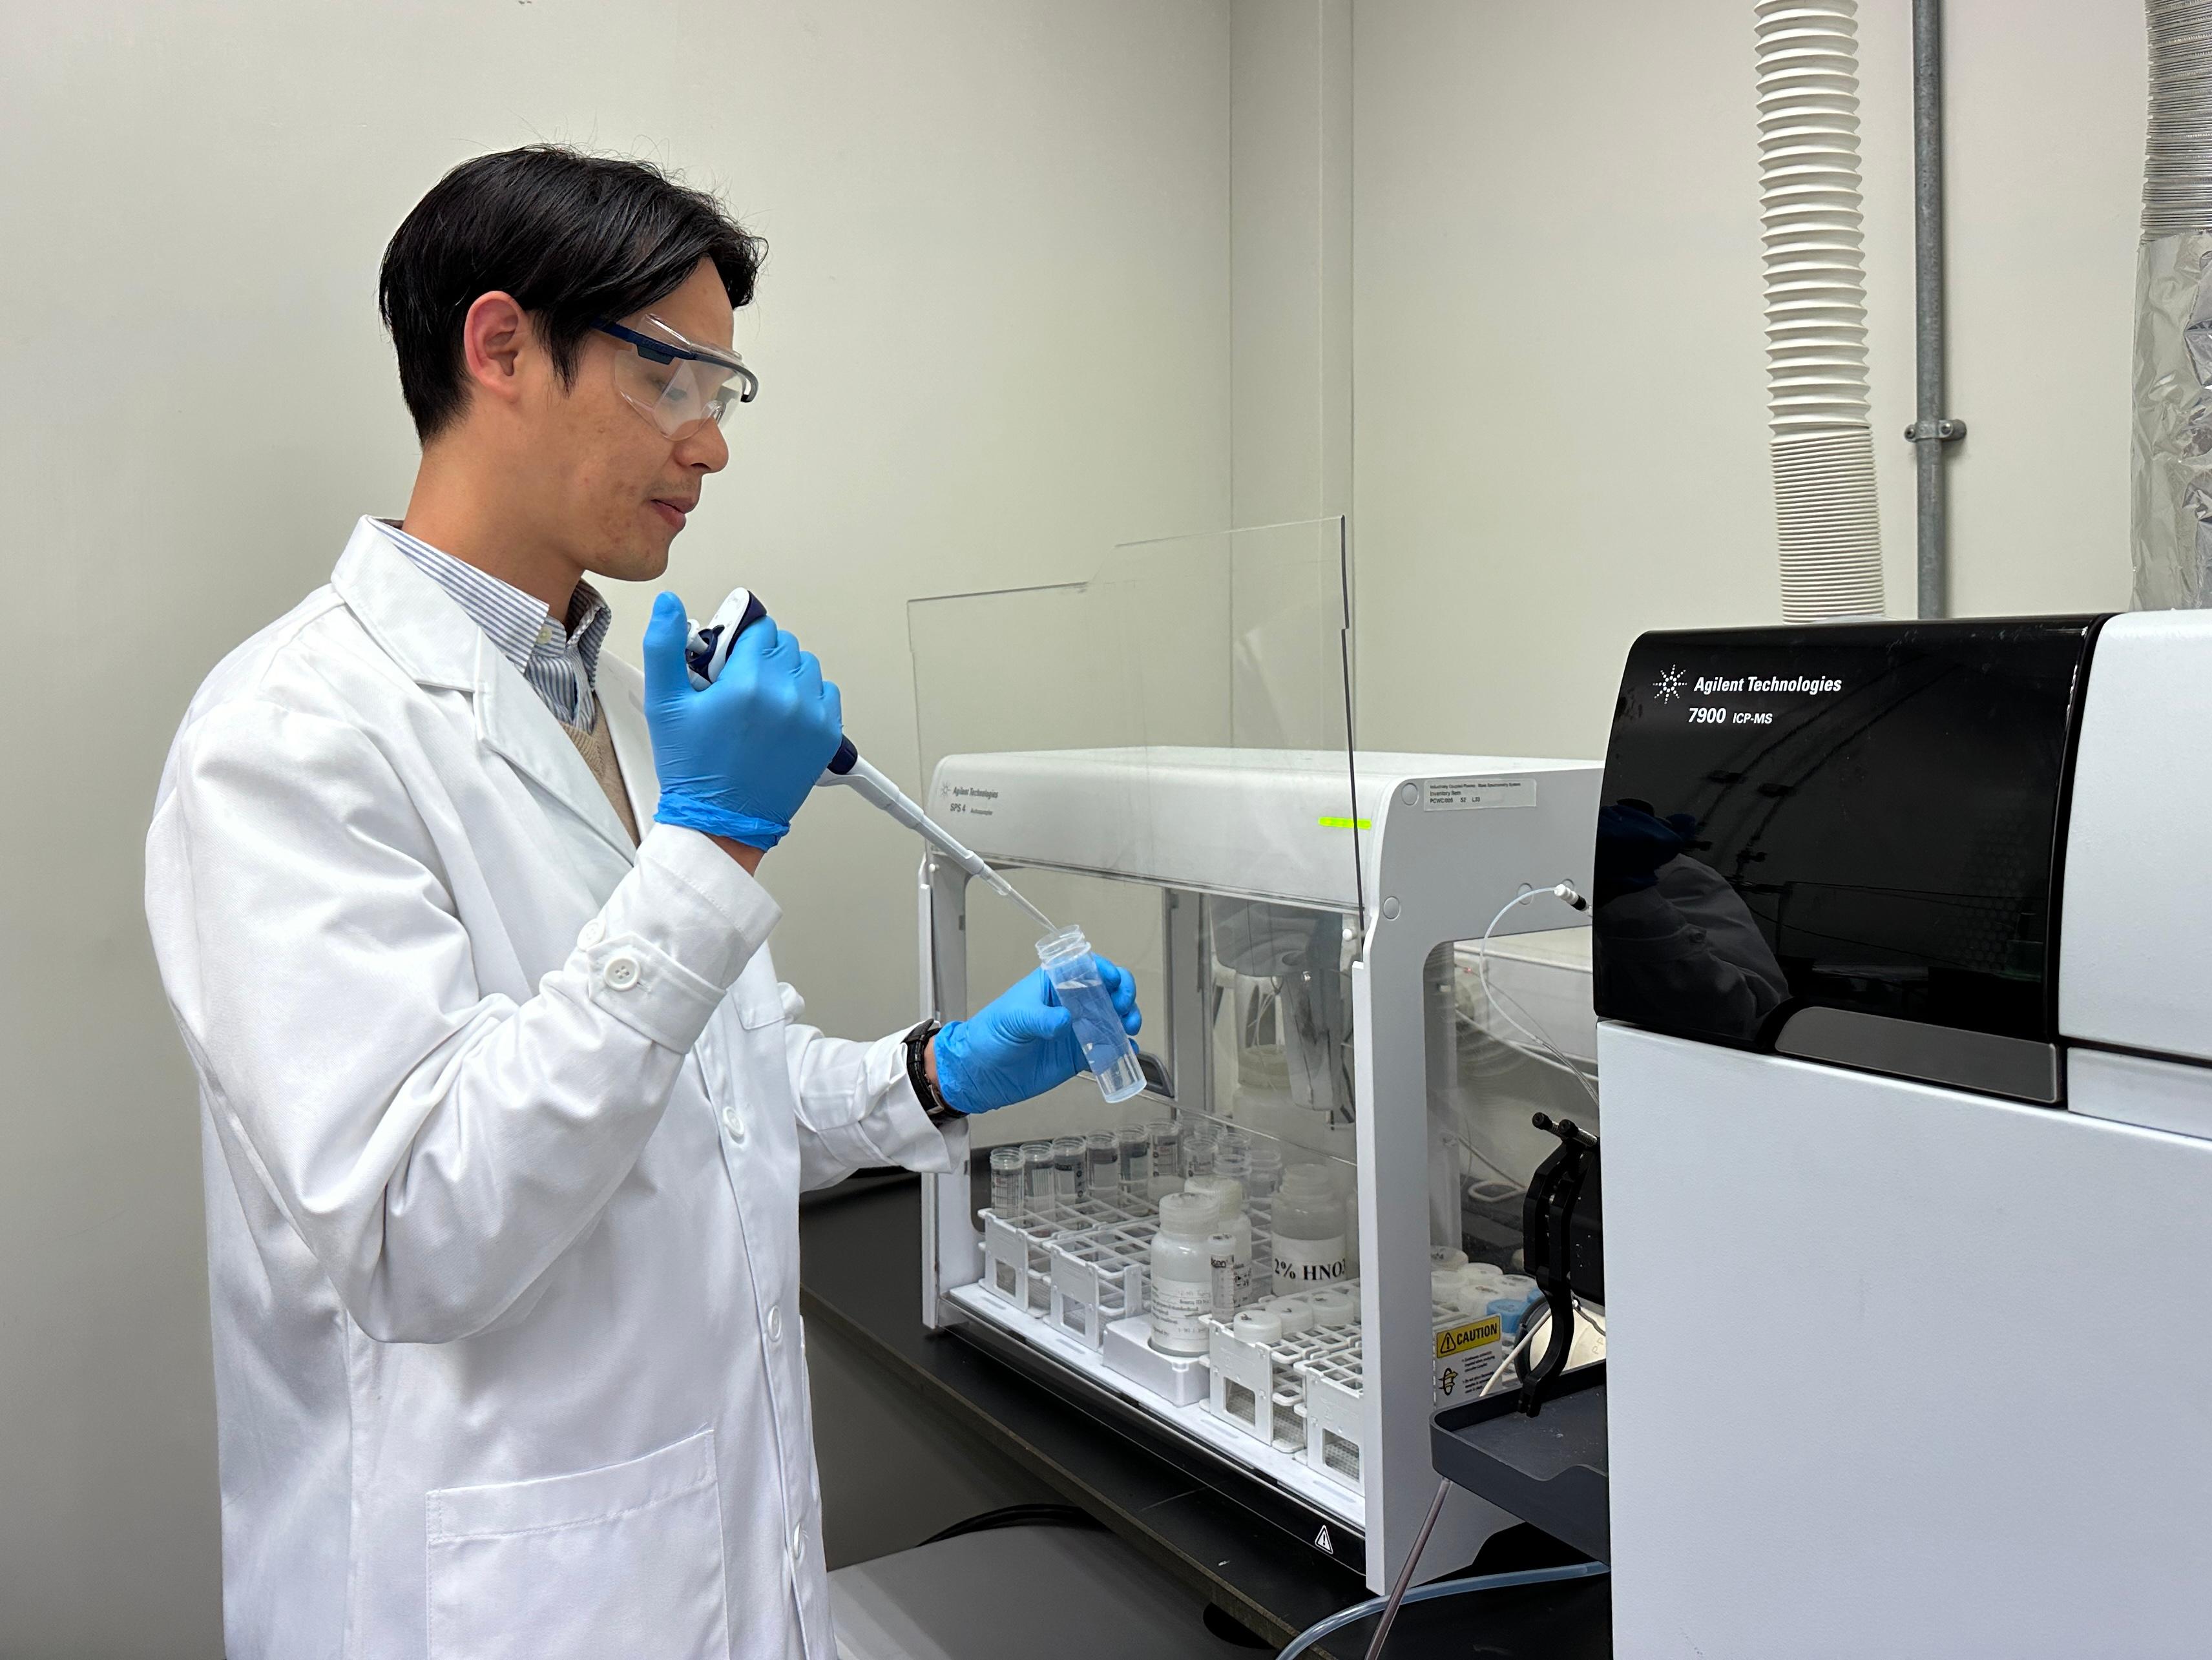 The Water Supplies Department (WSD) announced today (January 11) that drinking water samples were collected from water taps of 661 randomly selected premises under the Enhanced Water Quality Monitoring Programme in 2023. Results indicated that all drinking water samples complied with the Hong Kong Drinking Water Standards. Photo shows a WSD chemist testing the metal contents in drinking water samples using an Inductively Coupled Plasma Mass Spectrometer.